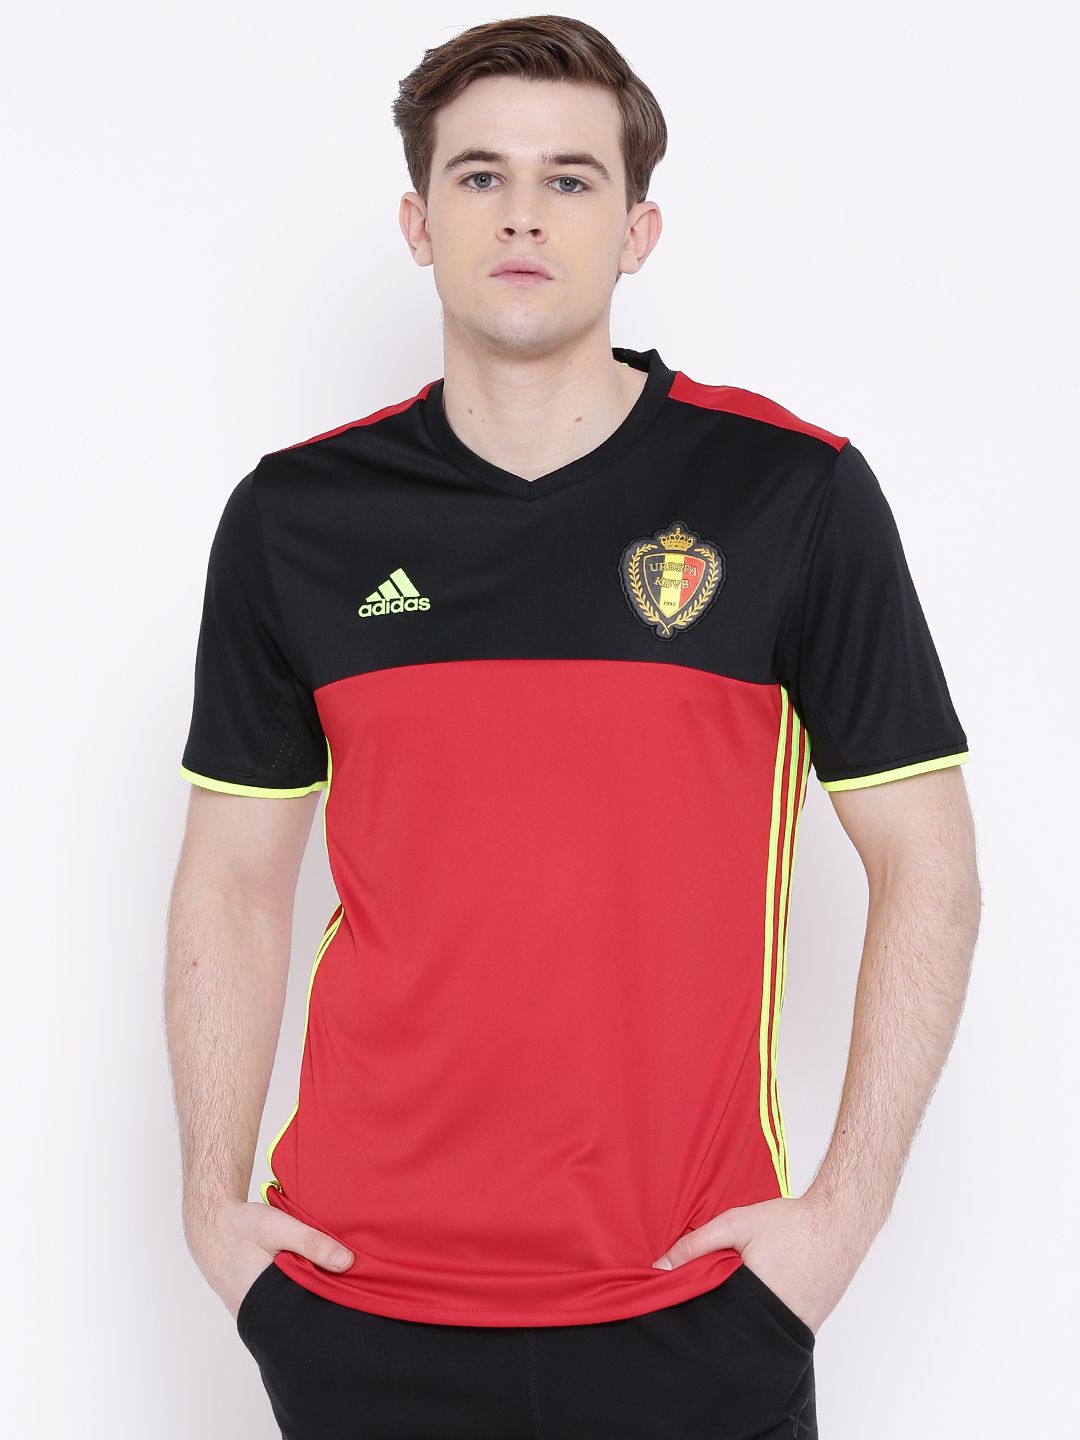 football jersey at lowest price in india